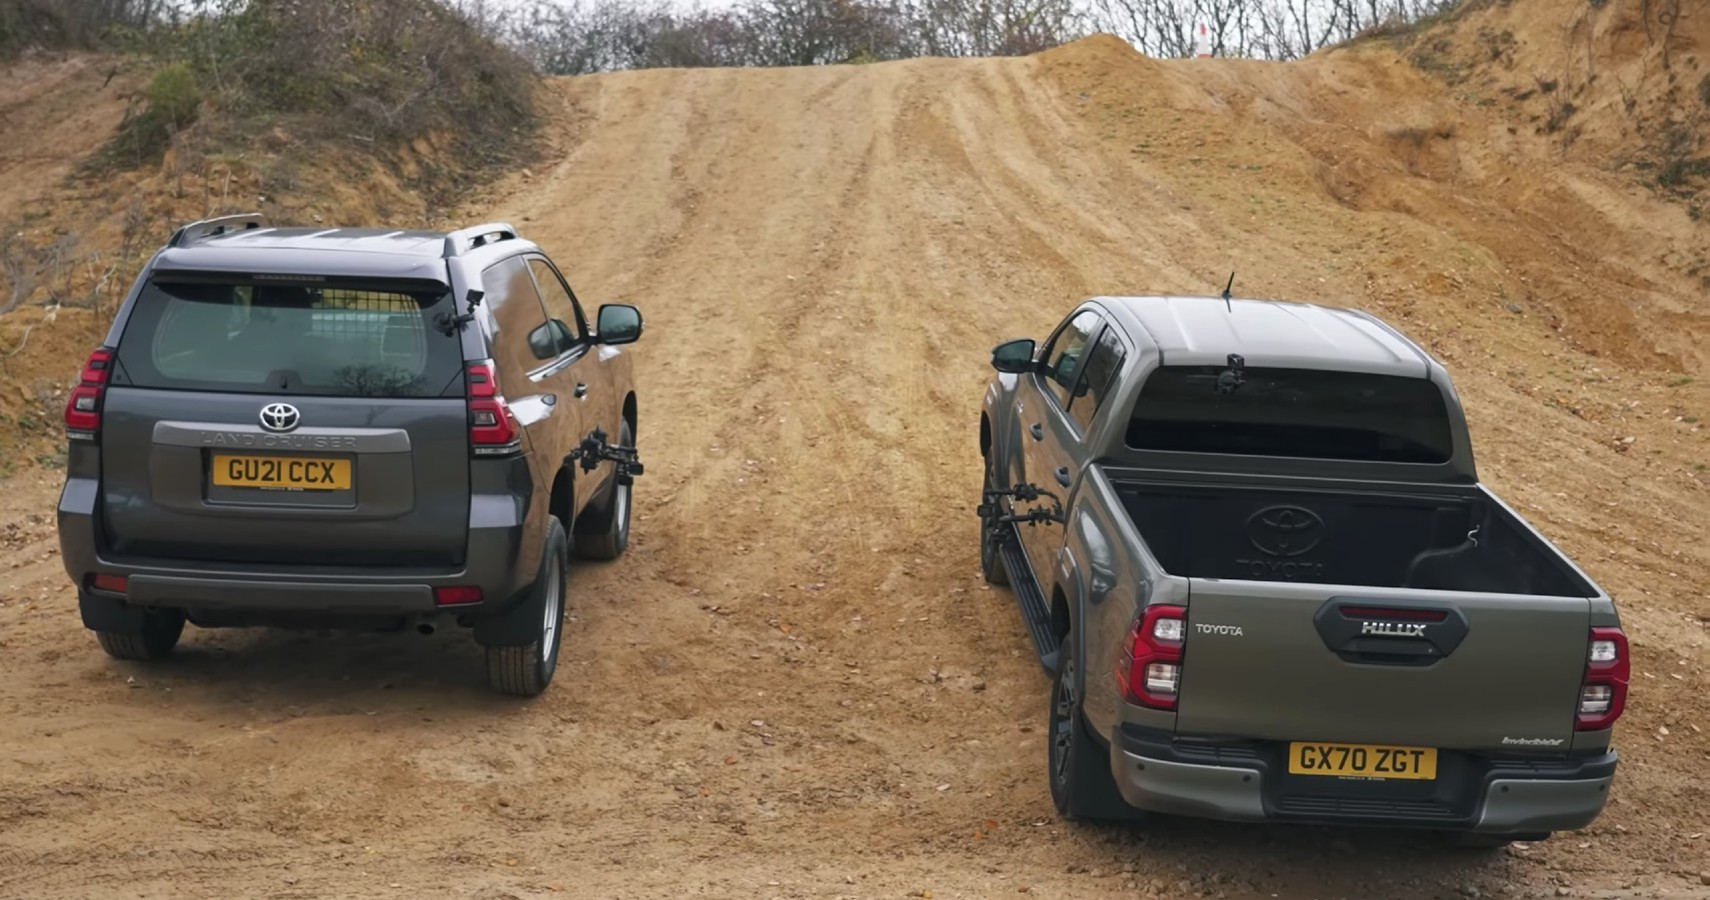 Toyota Hilux Takes On A Land Cruiser In An Uphill Drag Race Gets